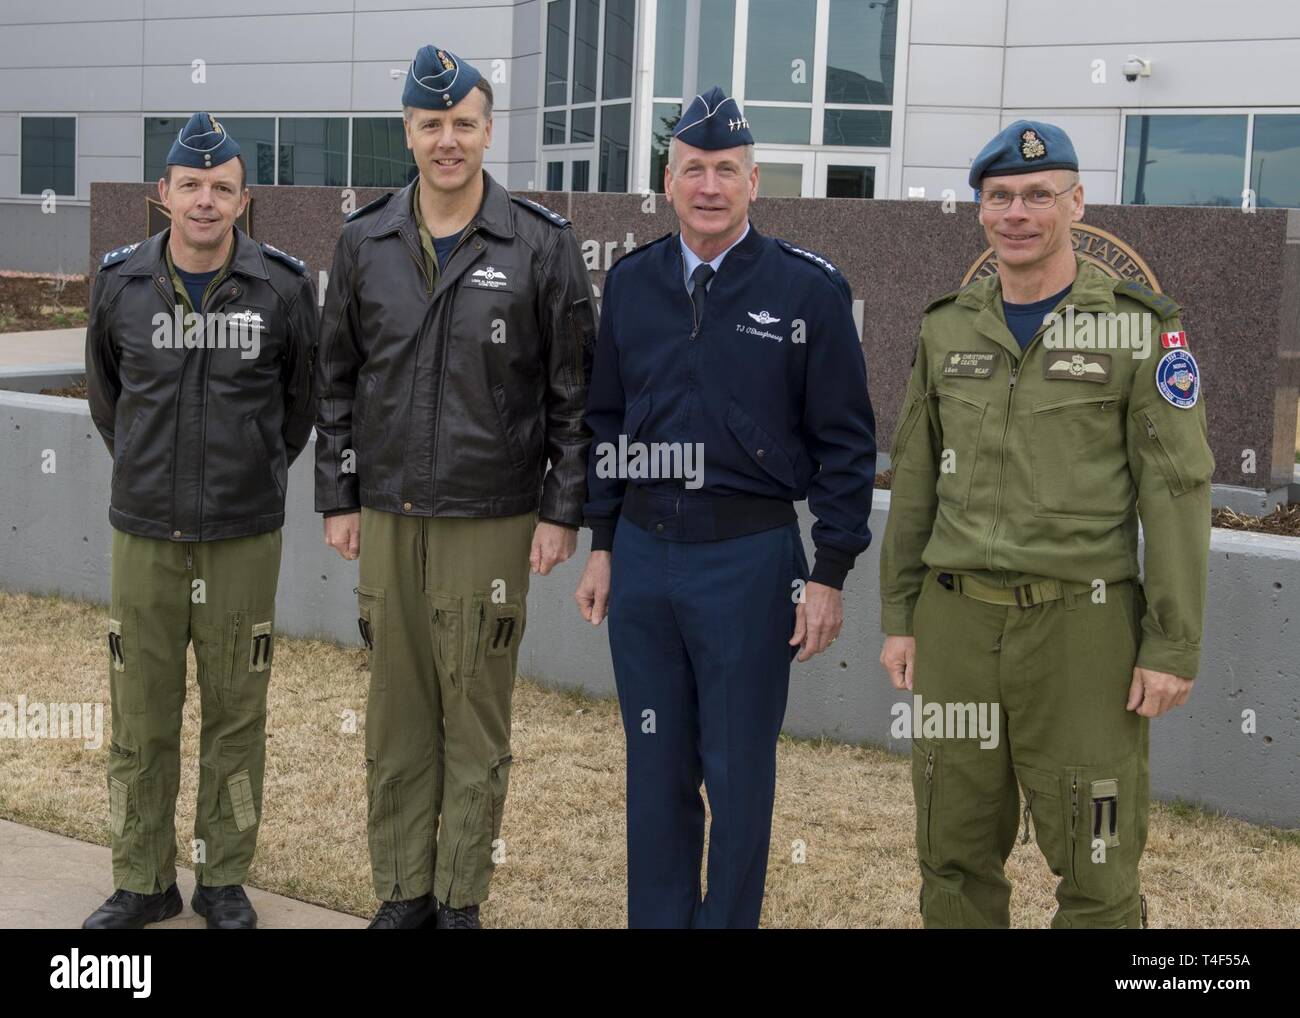 U.S. Air Force Gen. Terrence J. O'Shaughnessy, Commander, North American Aerospace Defense Command and U.S. Northern Command, Royal Canadian Air Force Commander, Lieutenant-General Al Meinzinger and the NORAD Deputy Commander, Royal Canadian Air Force Lieutenant-General Christopher Coatesstop for a photo in front of the Commands headquarters in Colorado Springs, Colorado, April 9, 2019. Lieutenant-General Meinzinger's visit is to discuss NORAD modernization efforts and the strong relationship between the RCAF and NORAD. Stock Photo